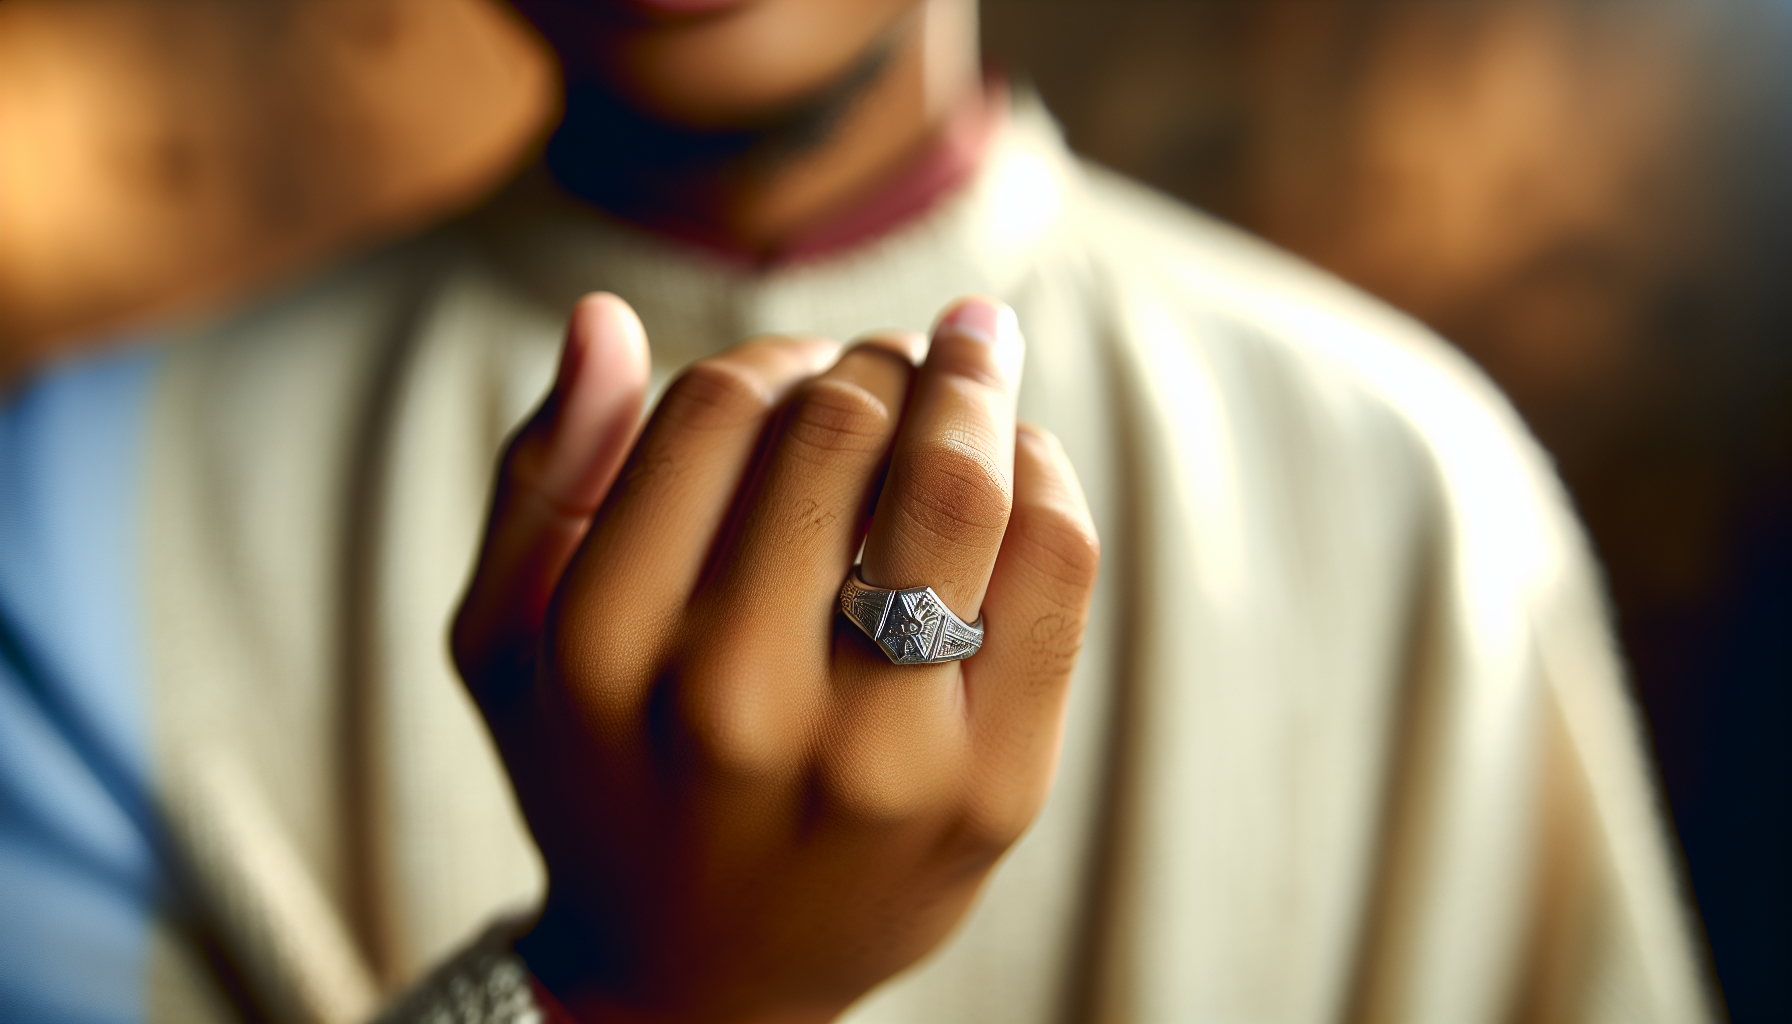 A person holding a purity ring as a symbol of commitment to sexual purity